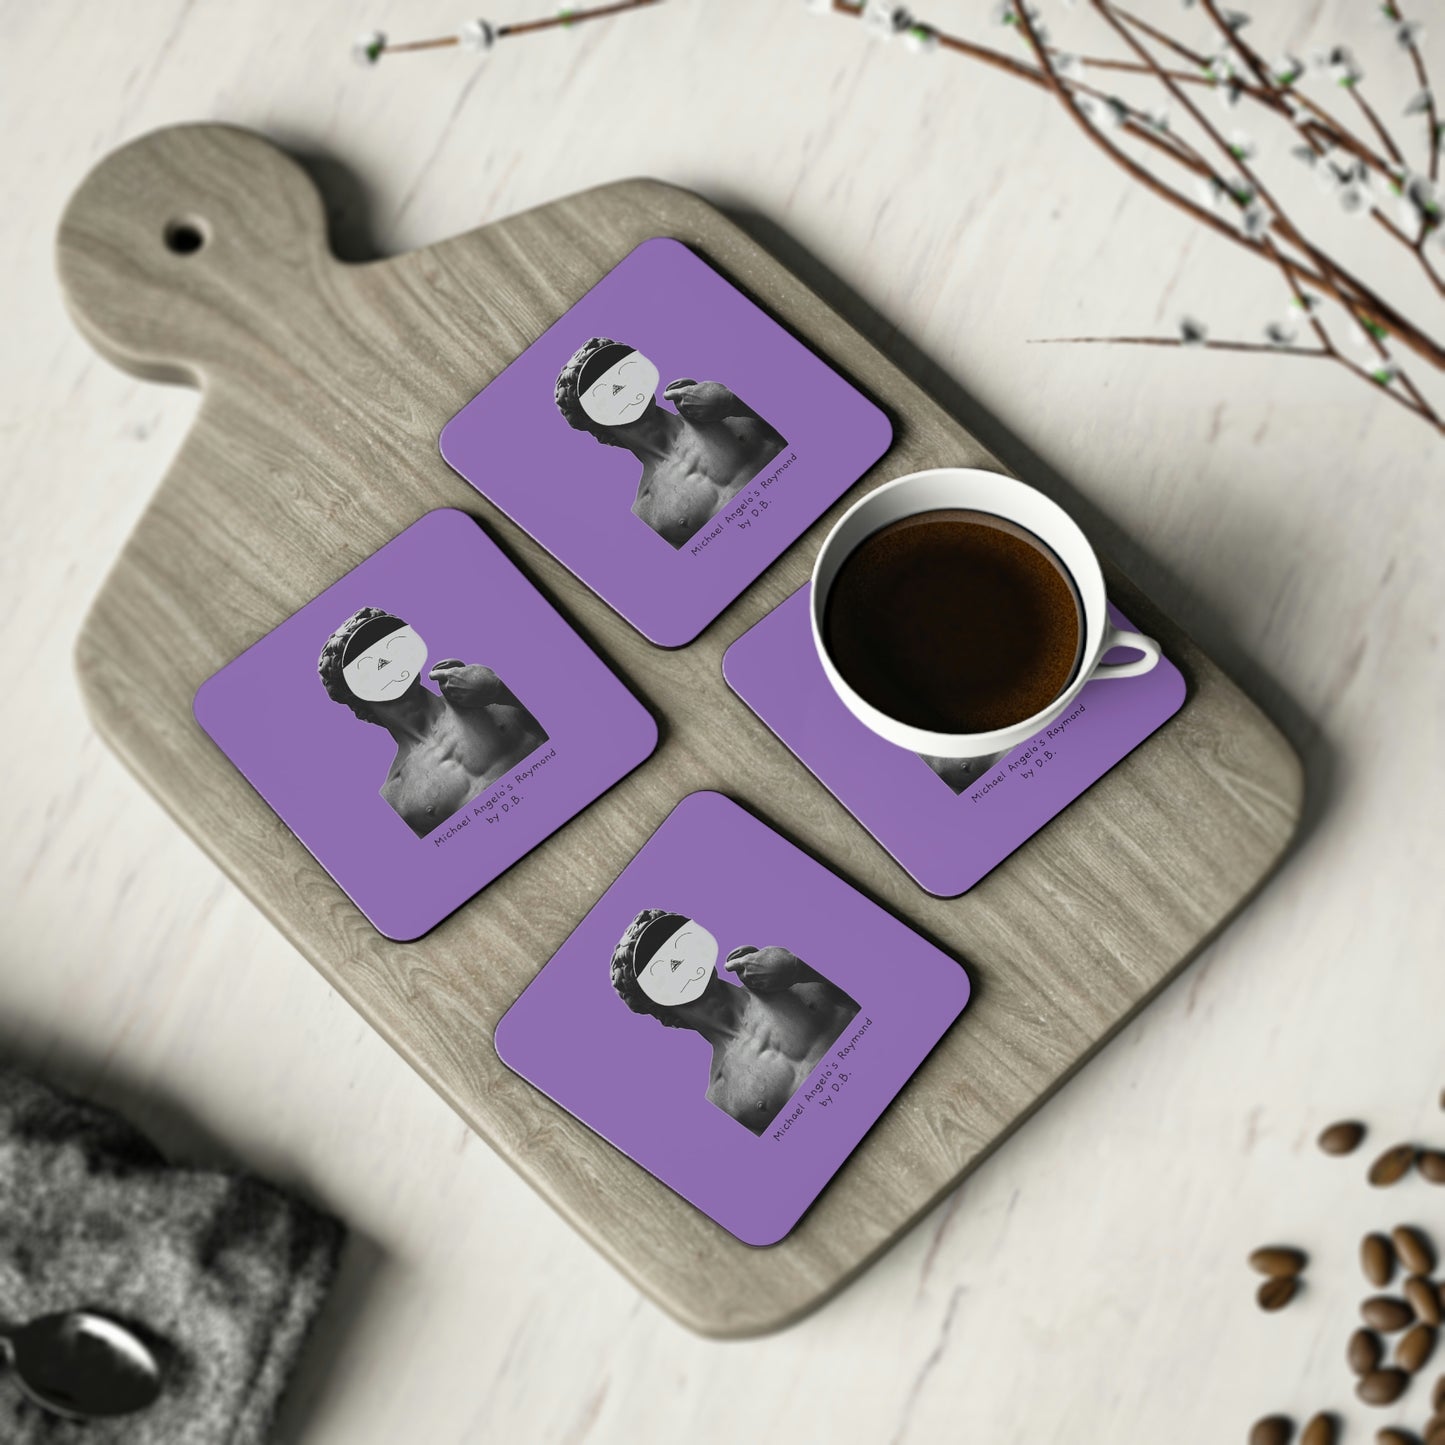 Stylish Drink Coasters with Michael Angelo's Raymond print by D.B.